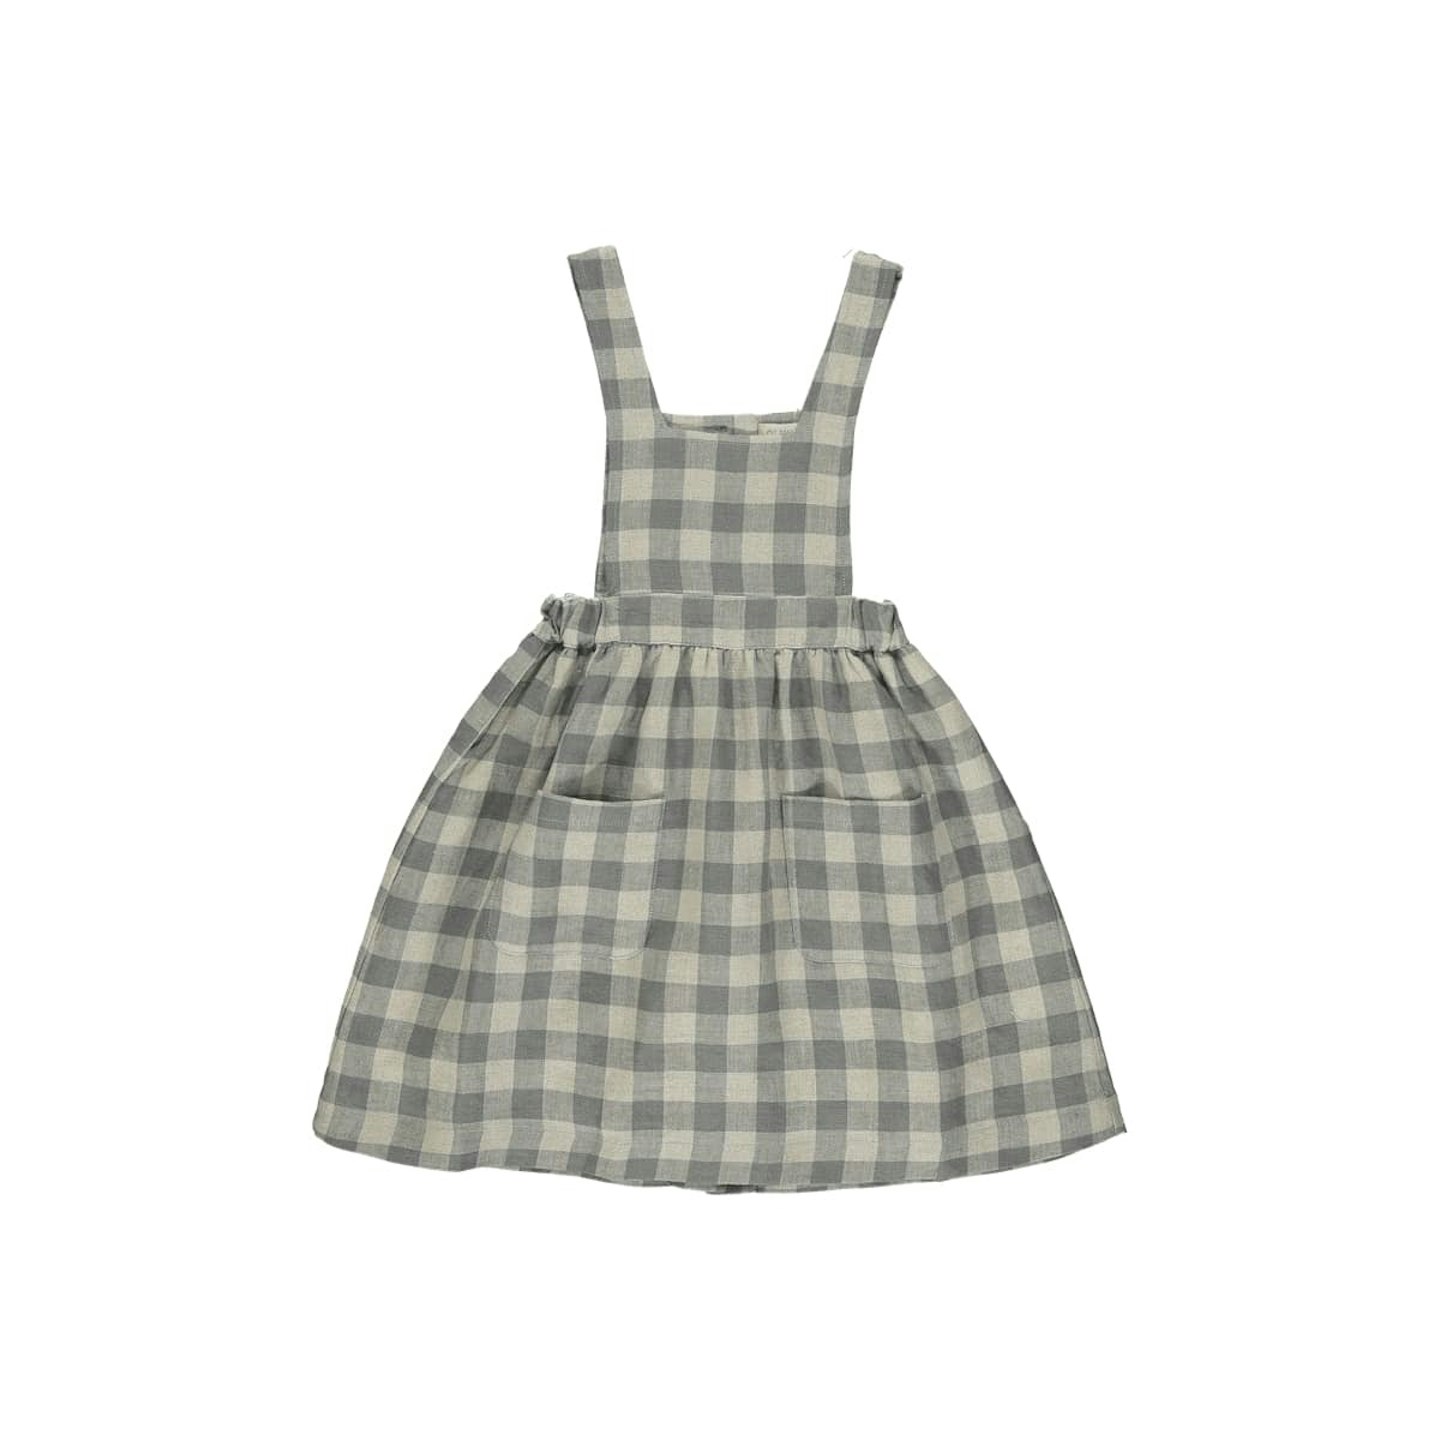 Olivier London Clementine Pinafore Dress, £34.50